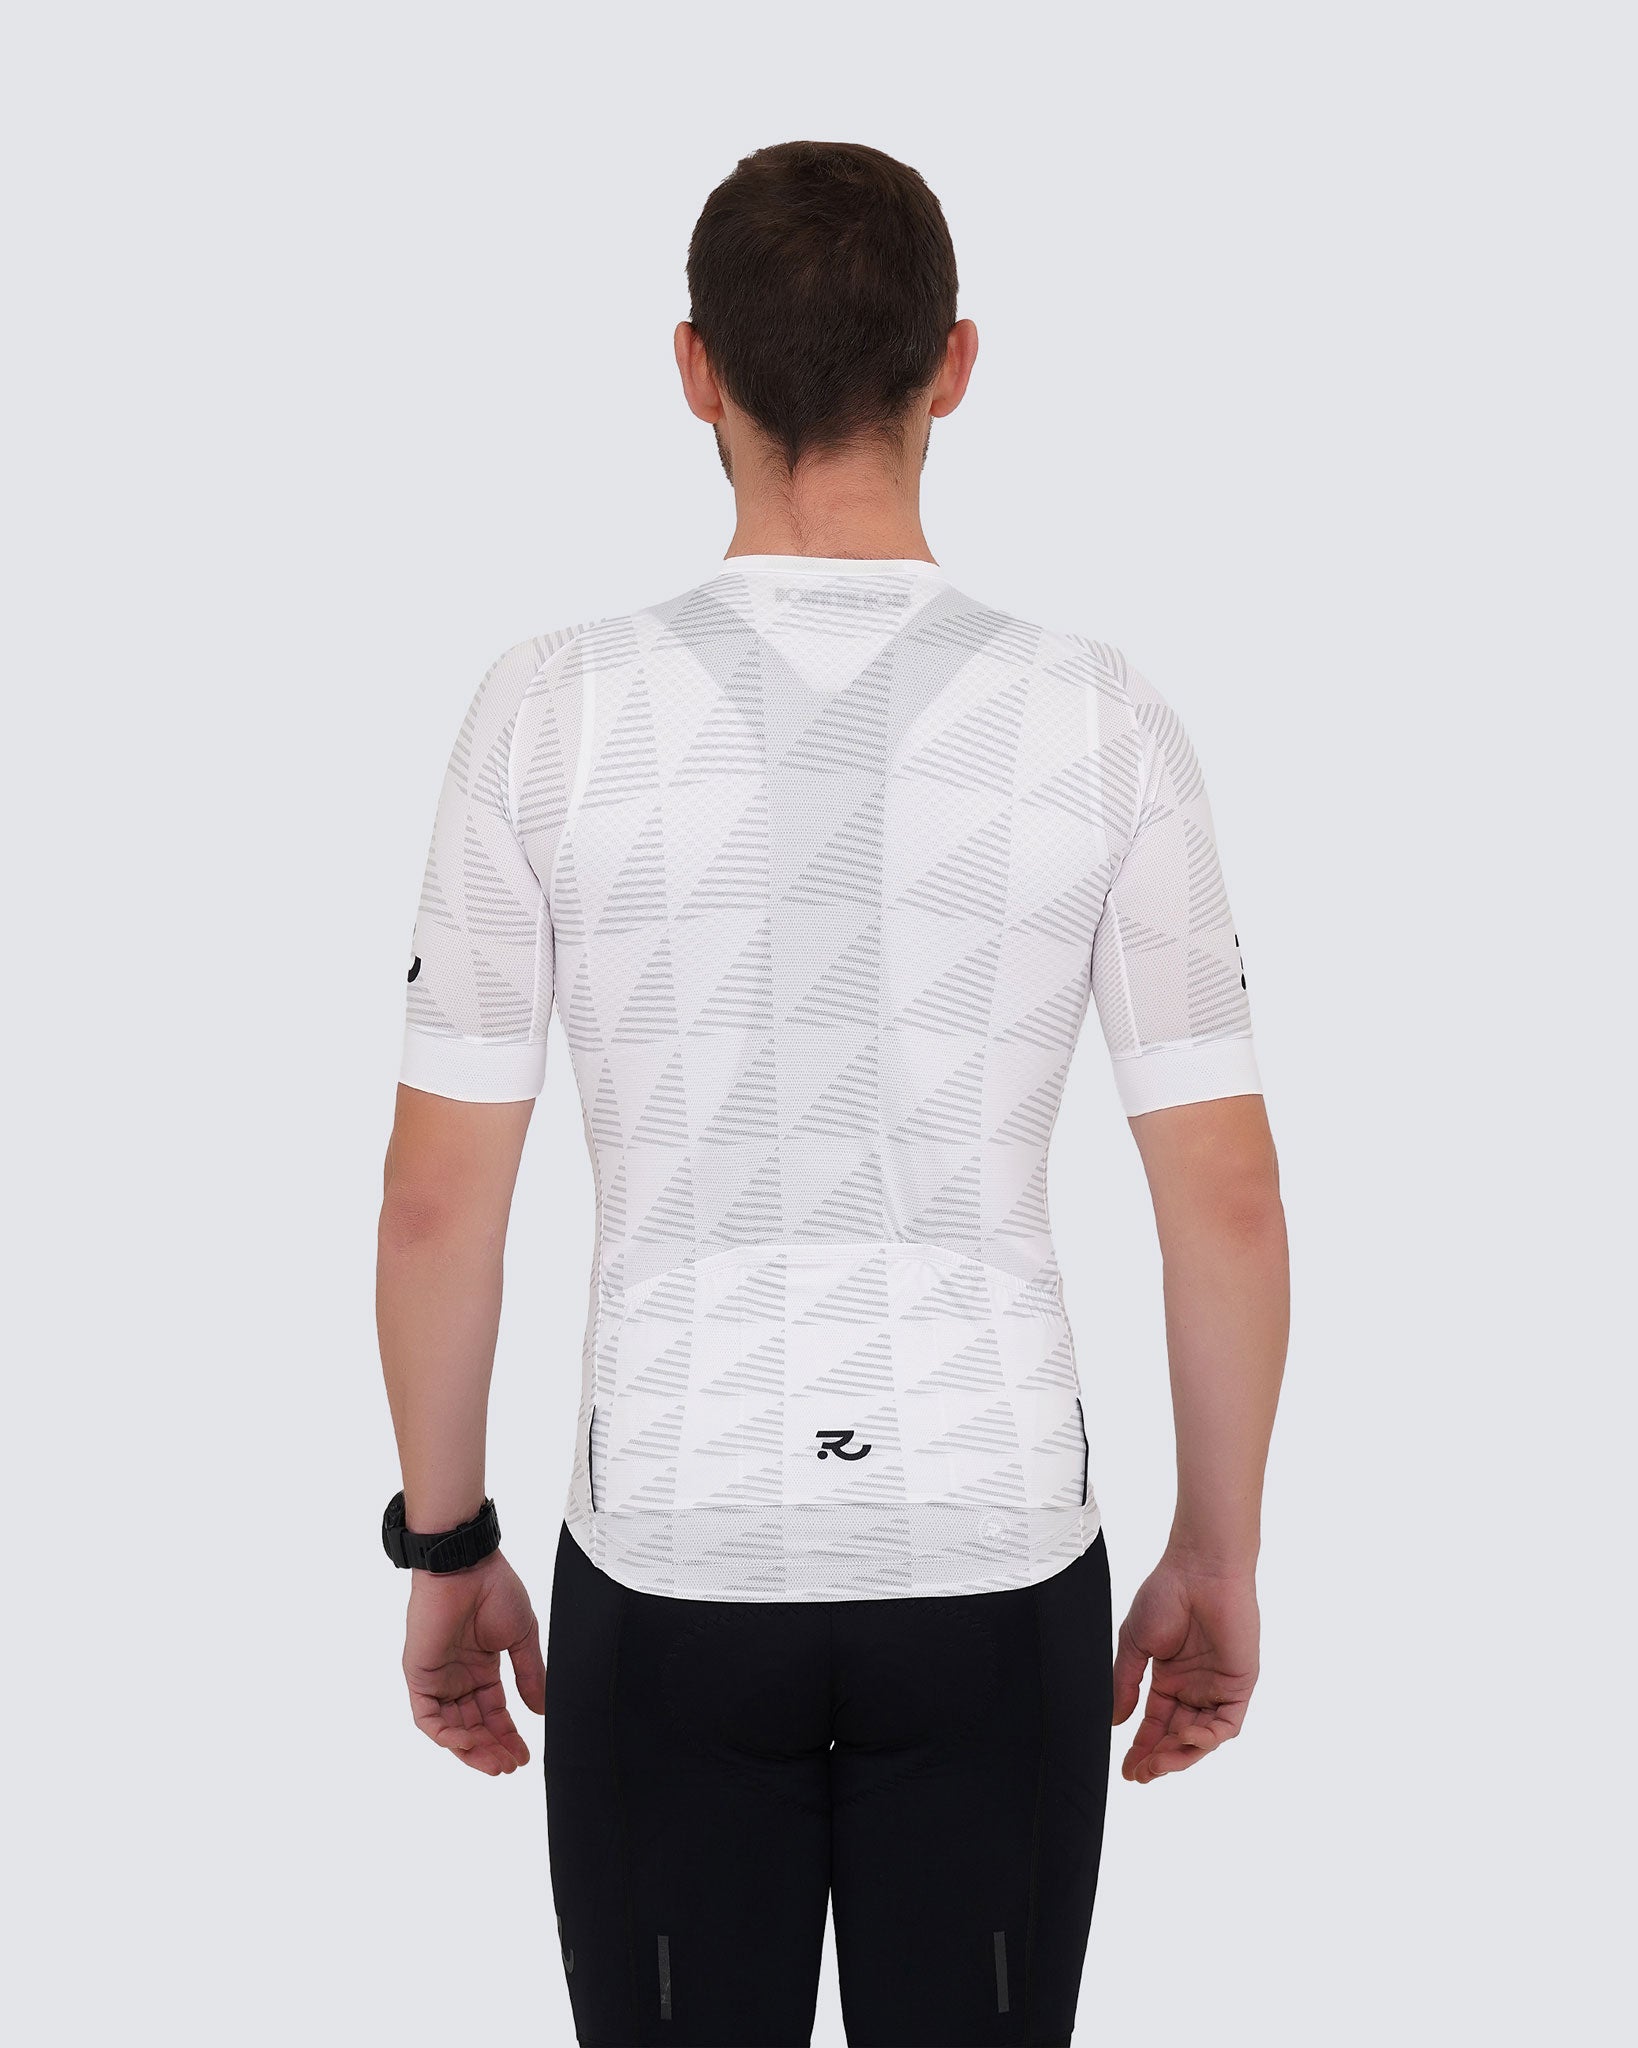 white cycling jersey from the back wore with black bib shorts